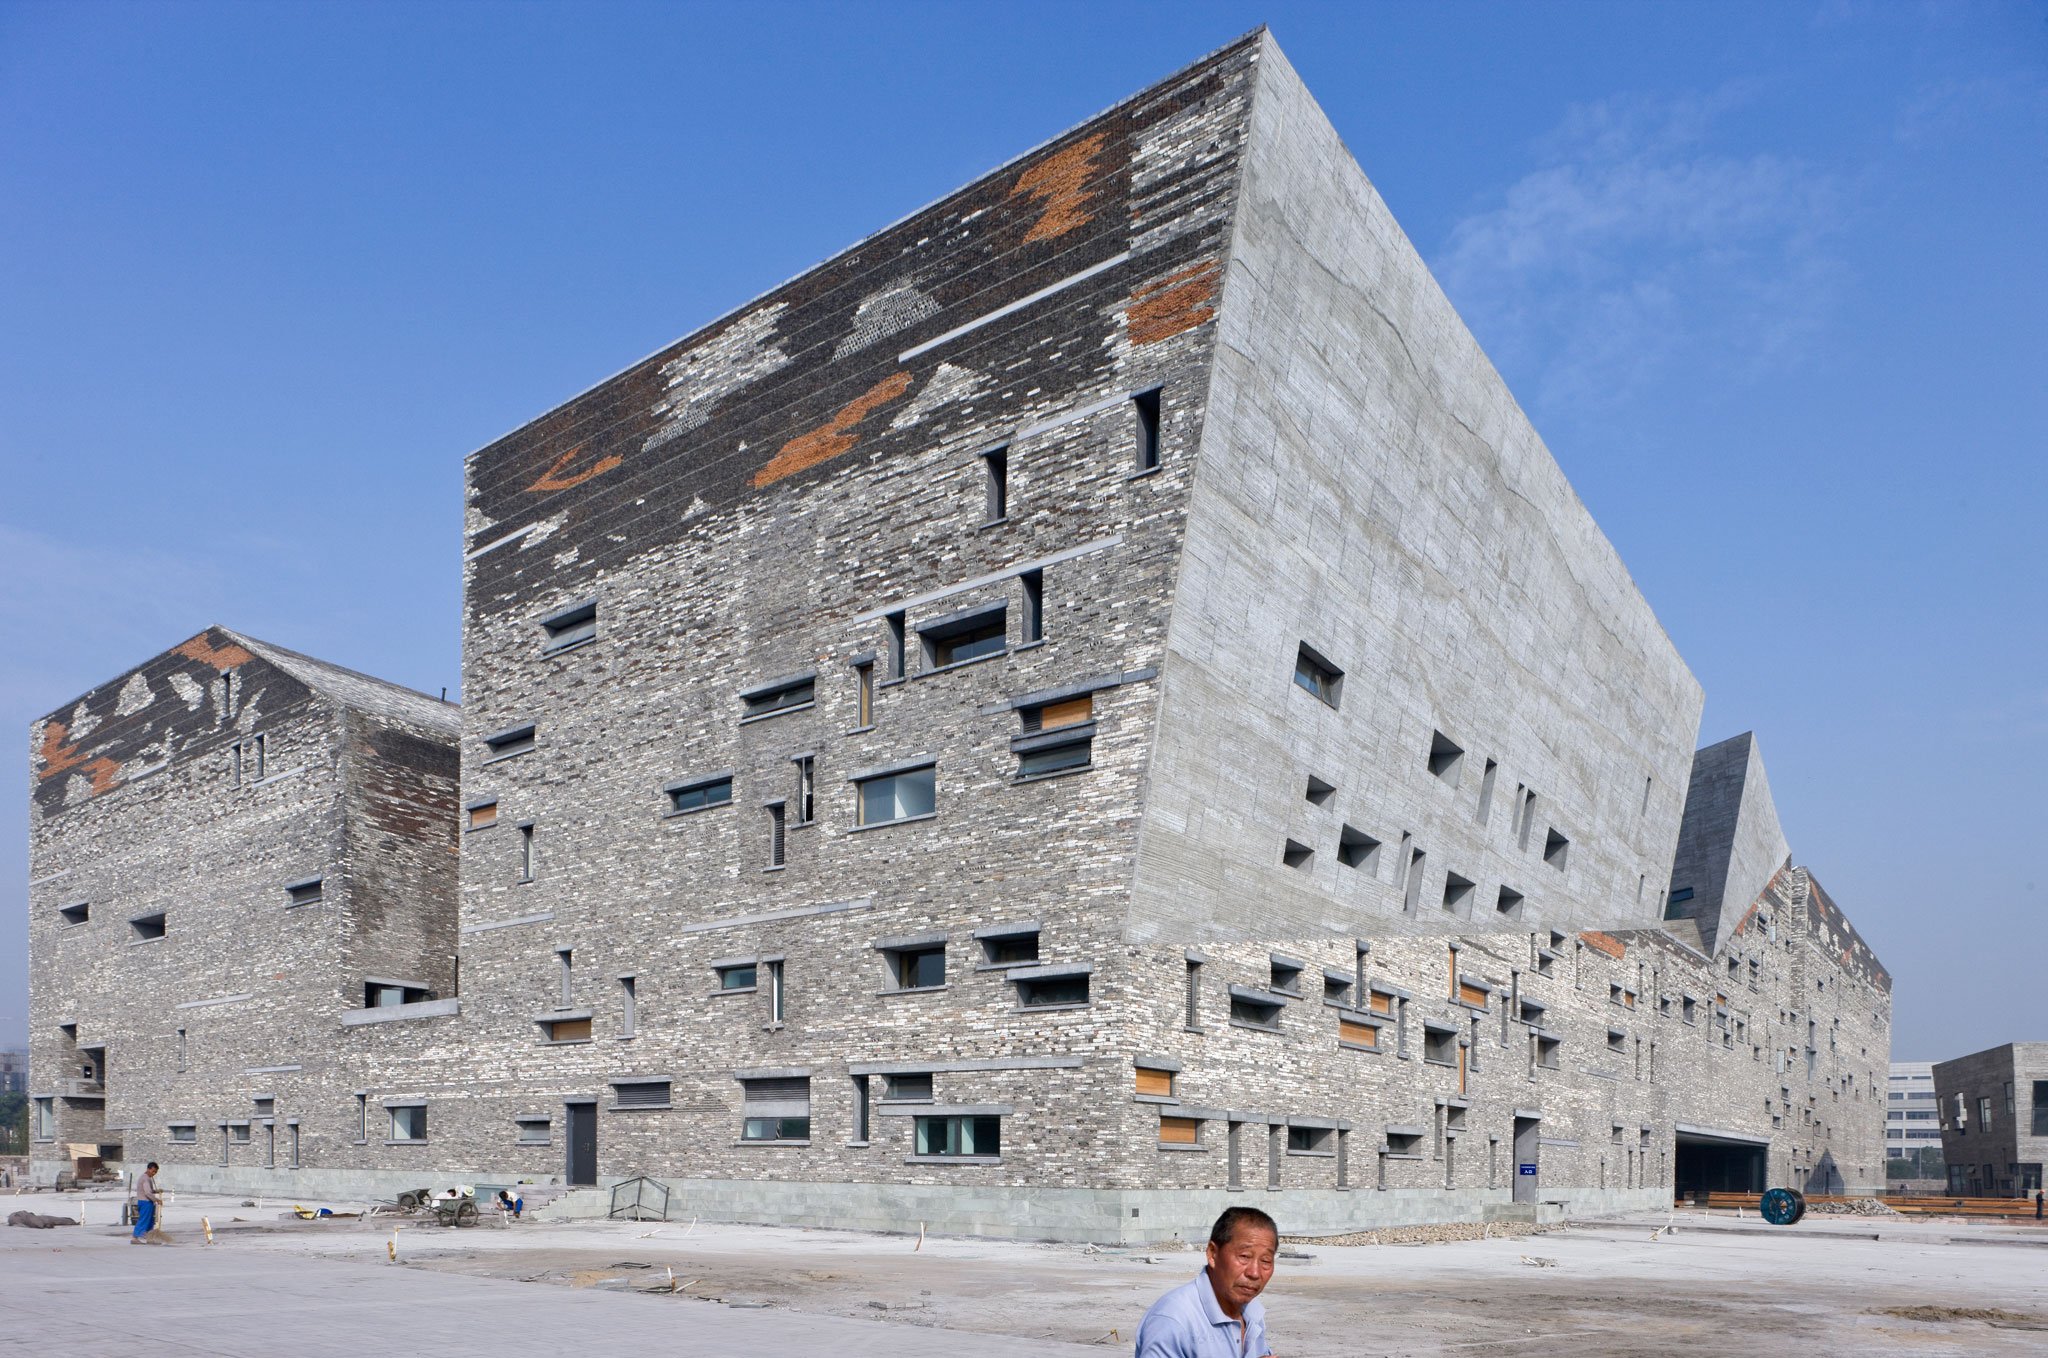 Ningbo Historic Museum designed by Wang Shu and Amateur Architecture Studio Photograph by Iwan Baan